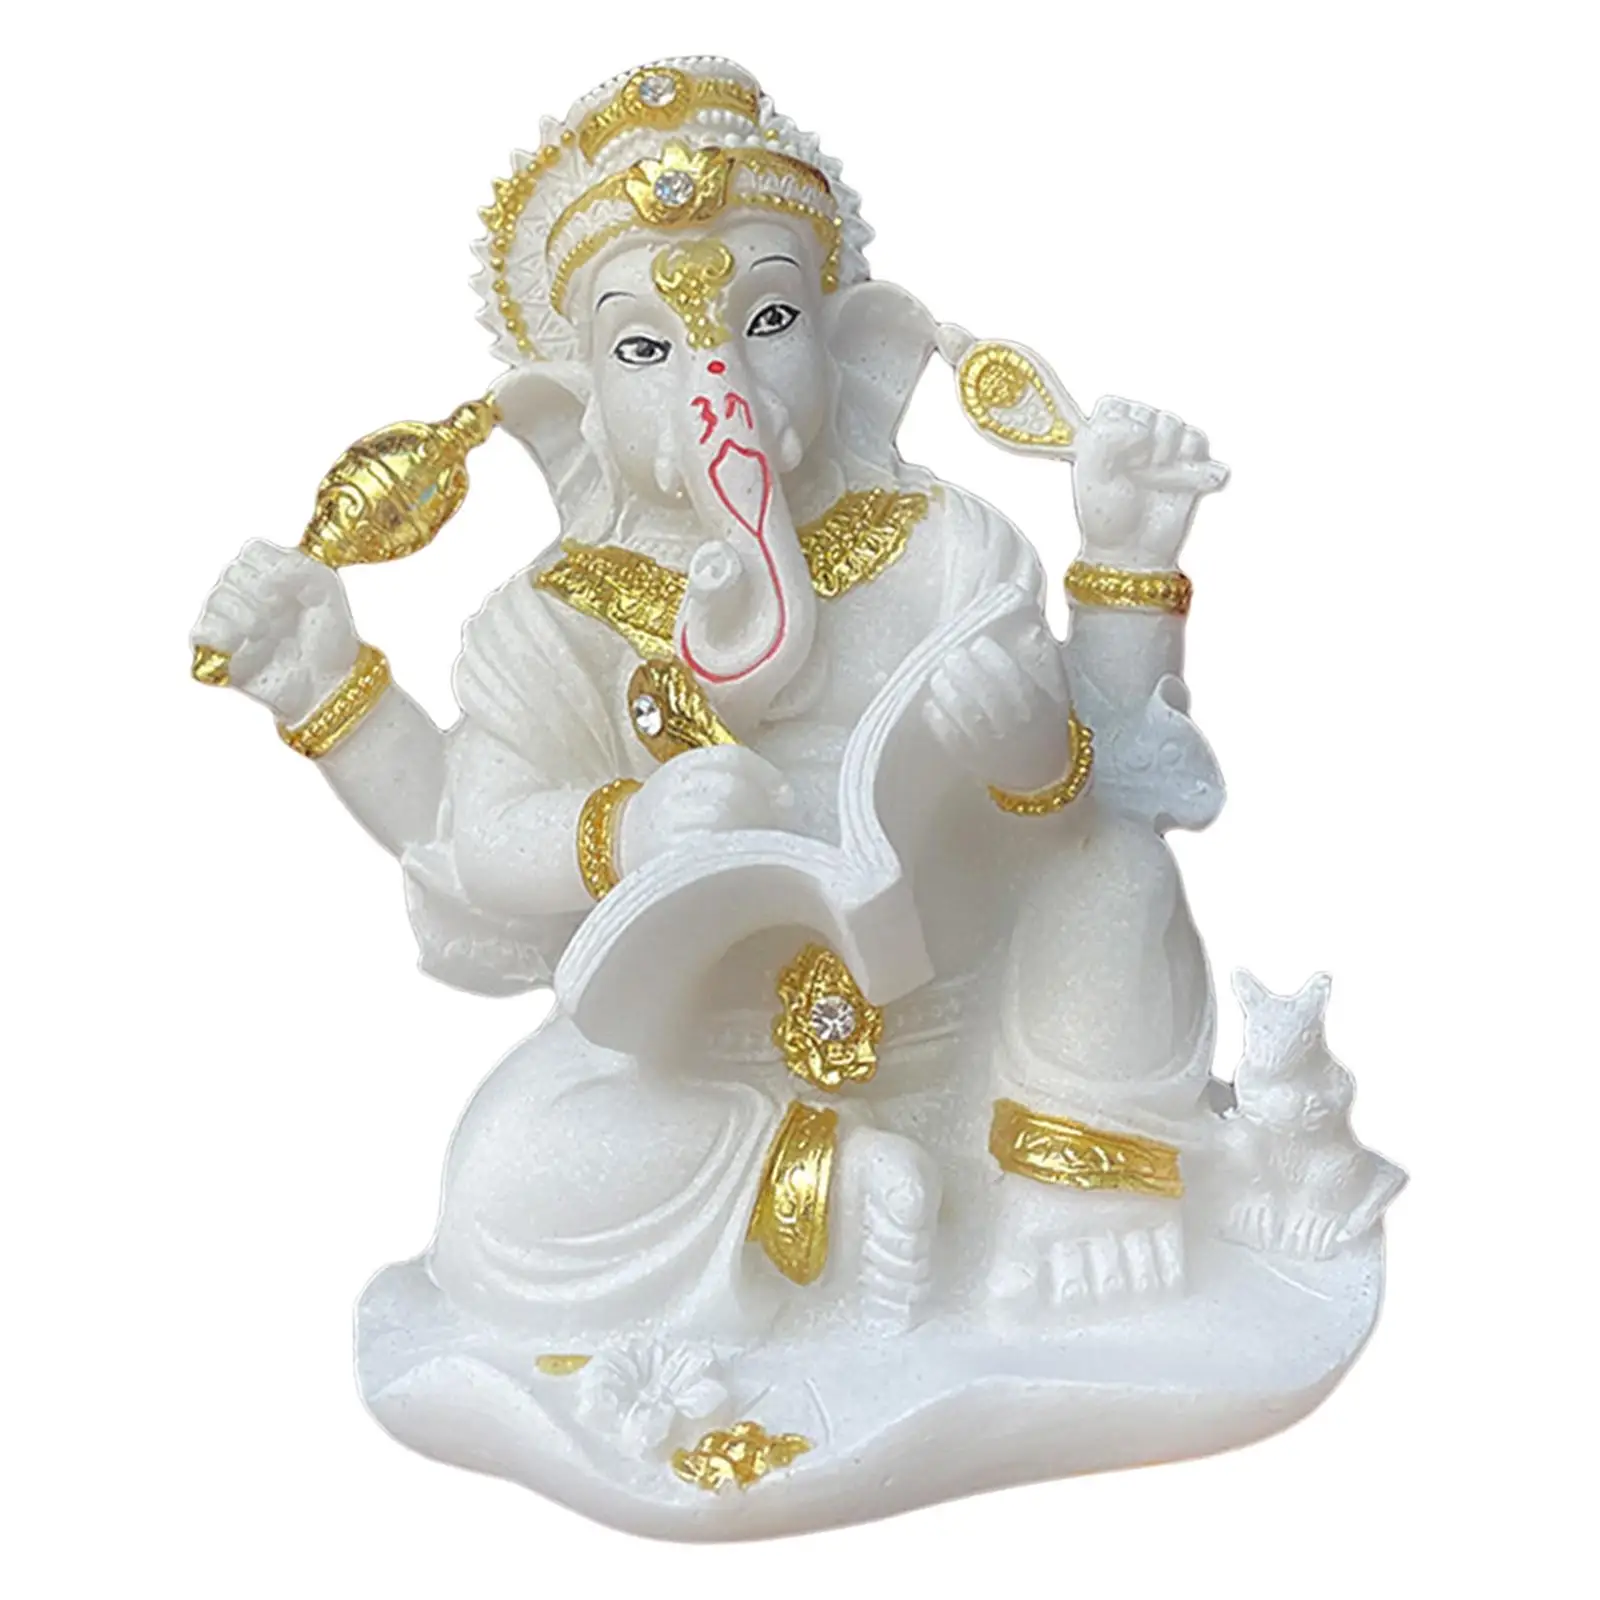 Lord Ganesha Statue Standing Elephant God Resin Indian Decoration Sculpture Ornament for Home Decor Collectible Meditation Car